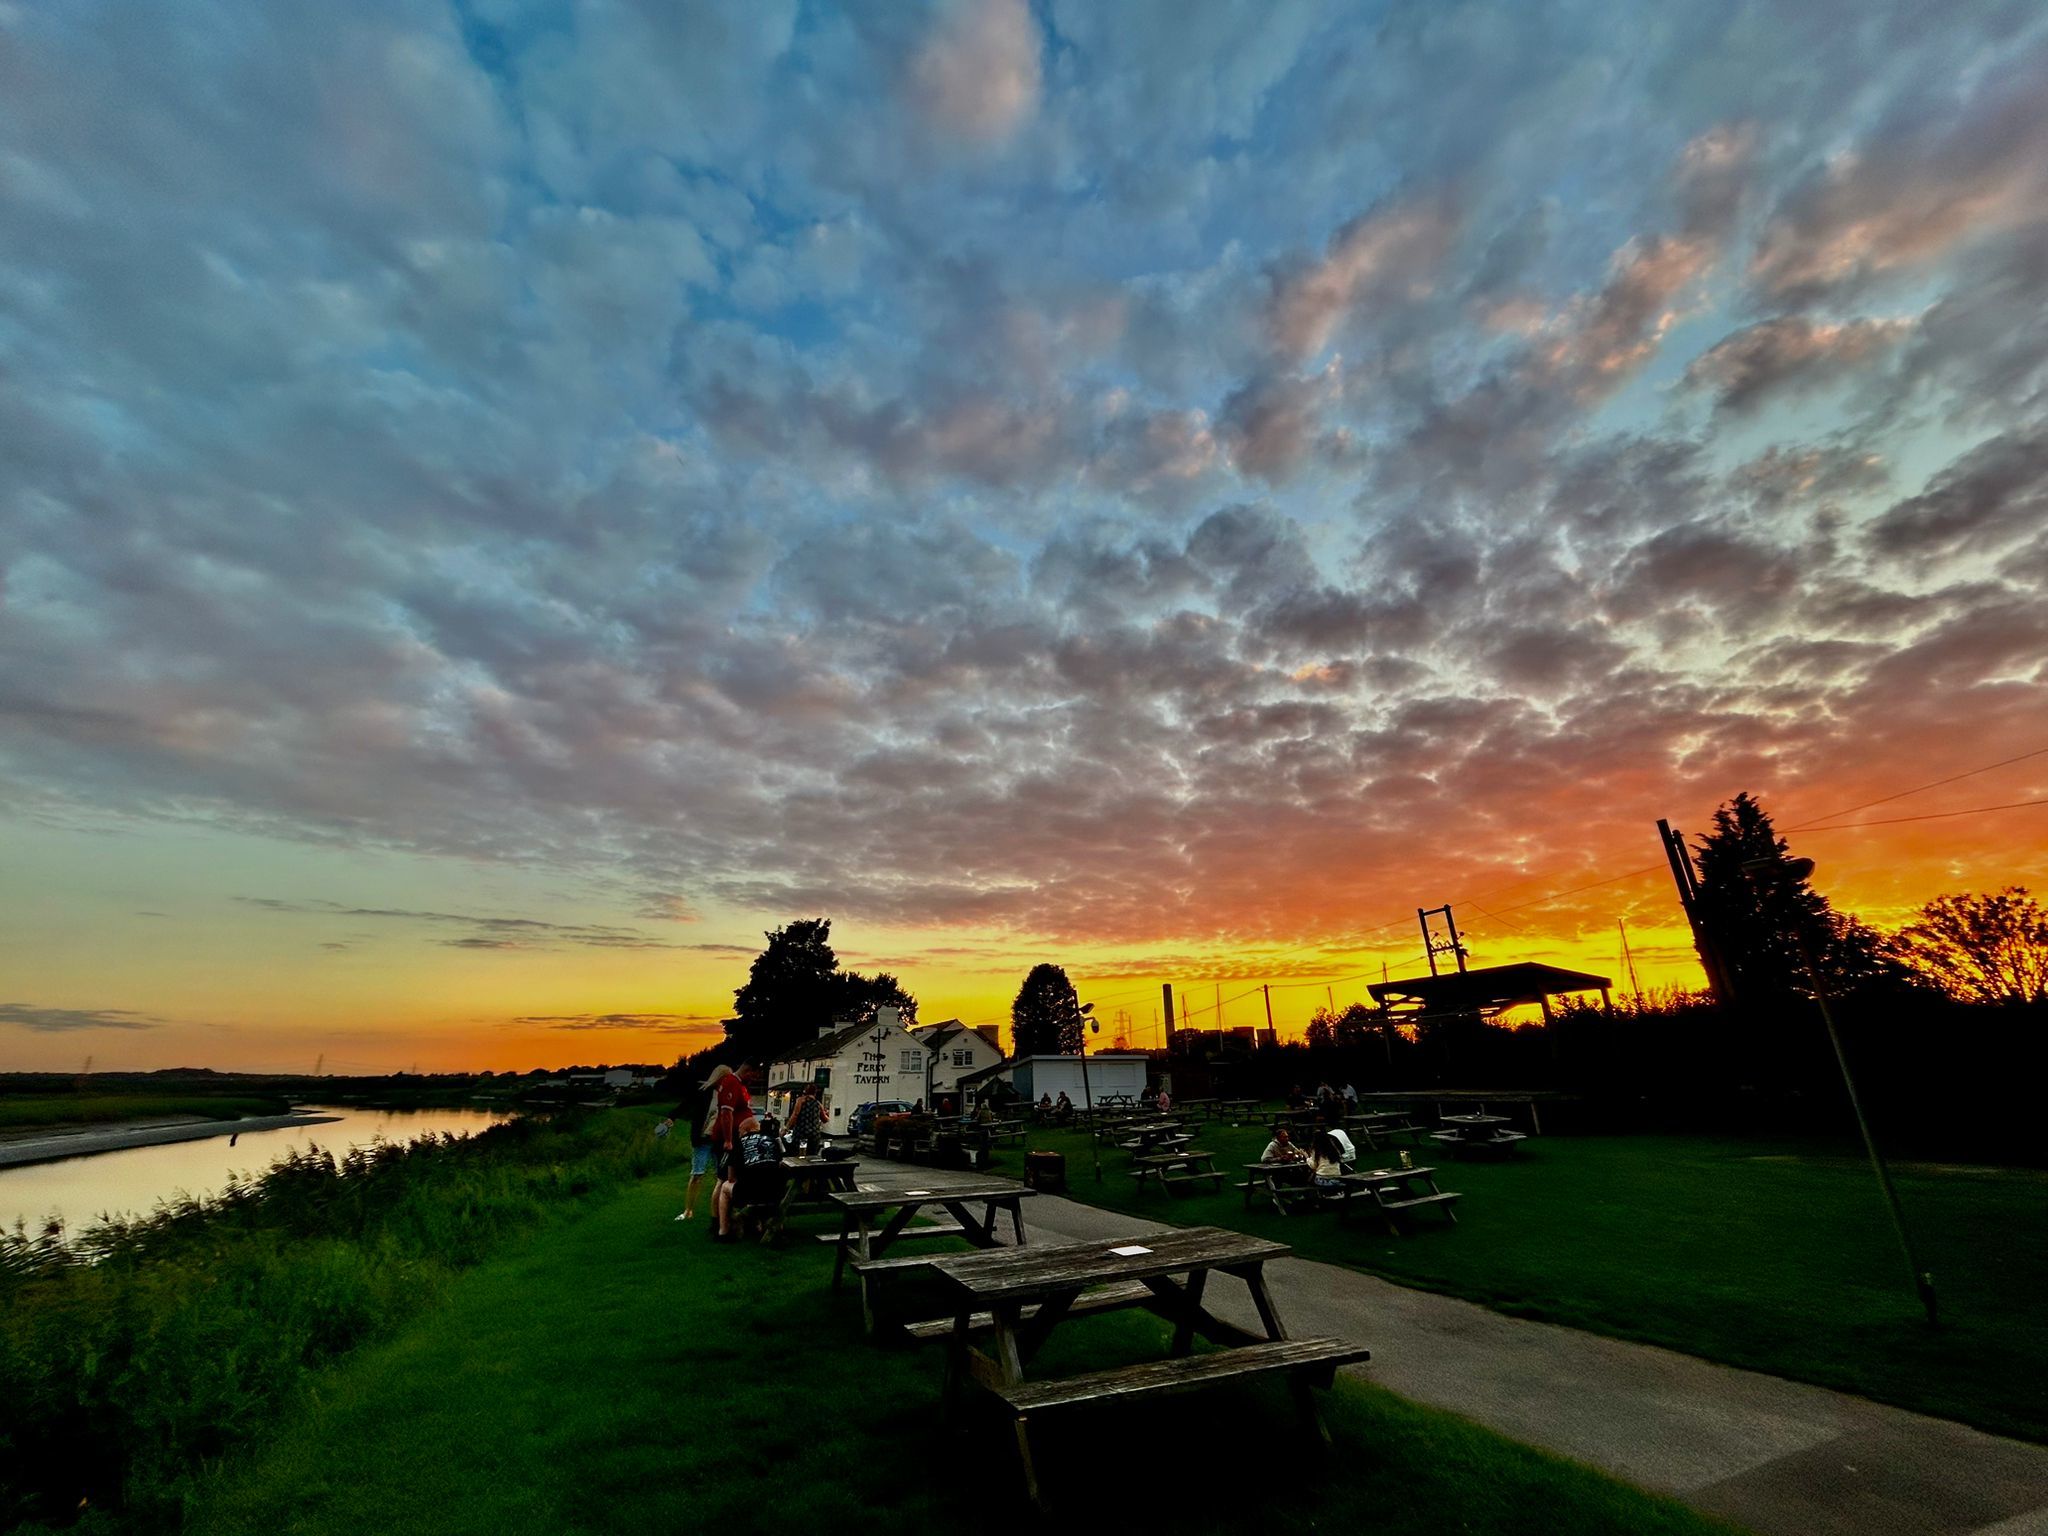 The Ferry Tavern is the perfect place to watch the sunset